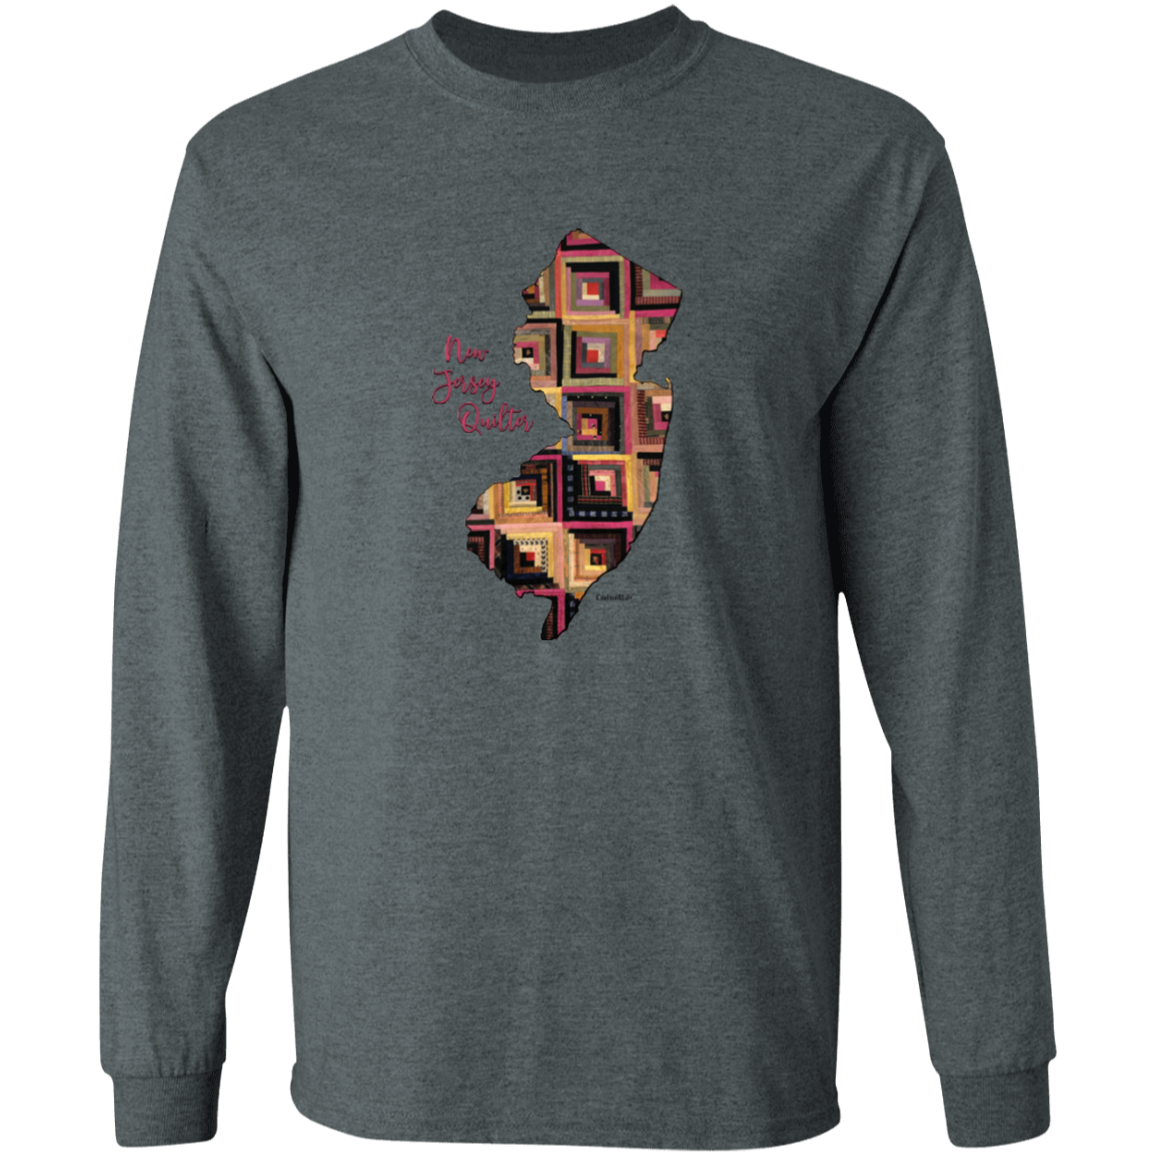 New Jersey Quilter Long Sleeve T-Shirt, Gift for Quilting Friends and Family